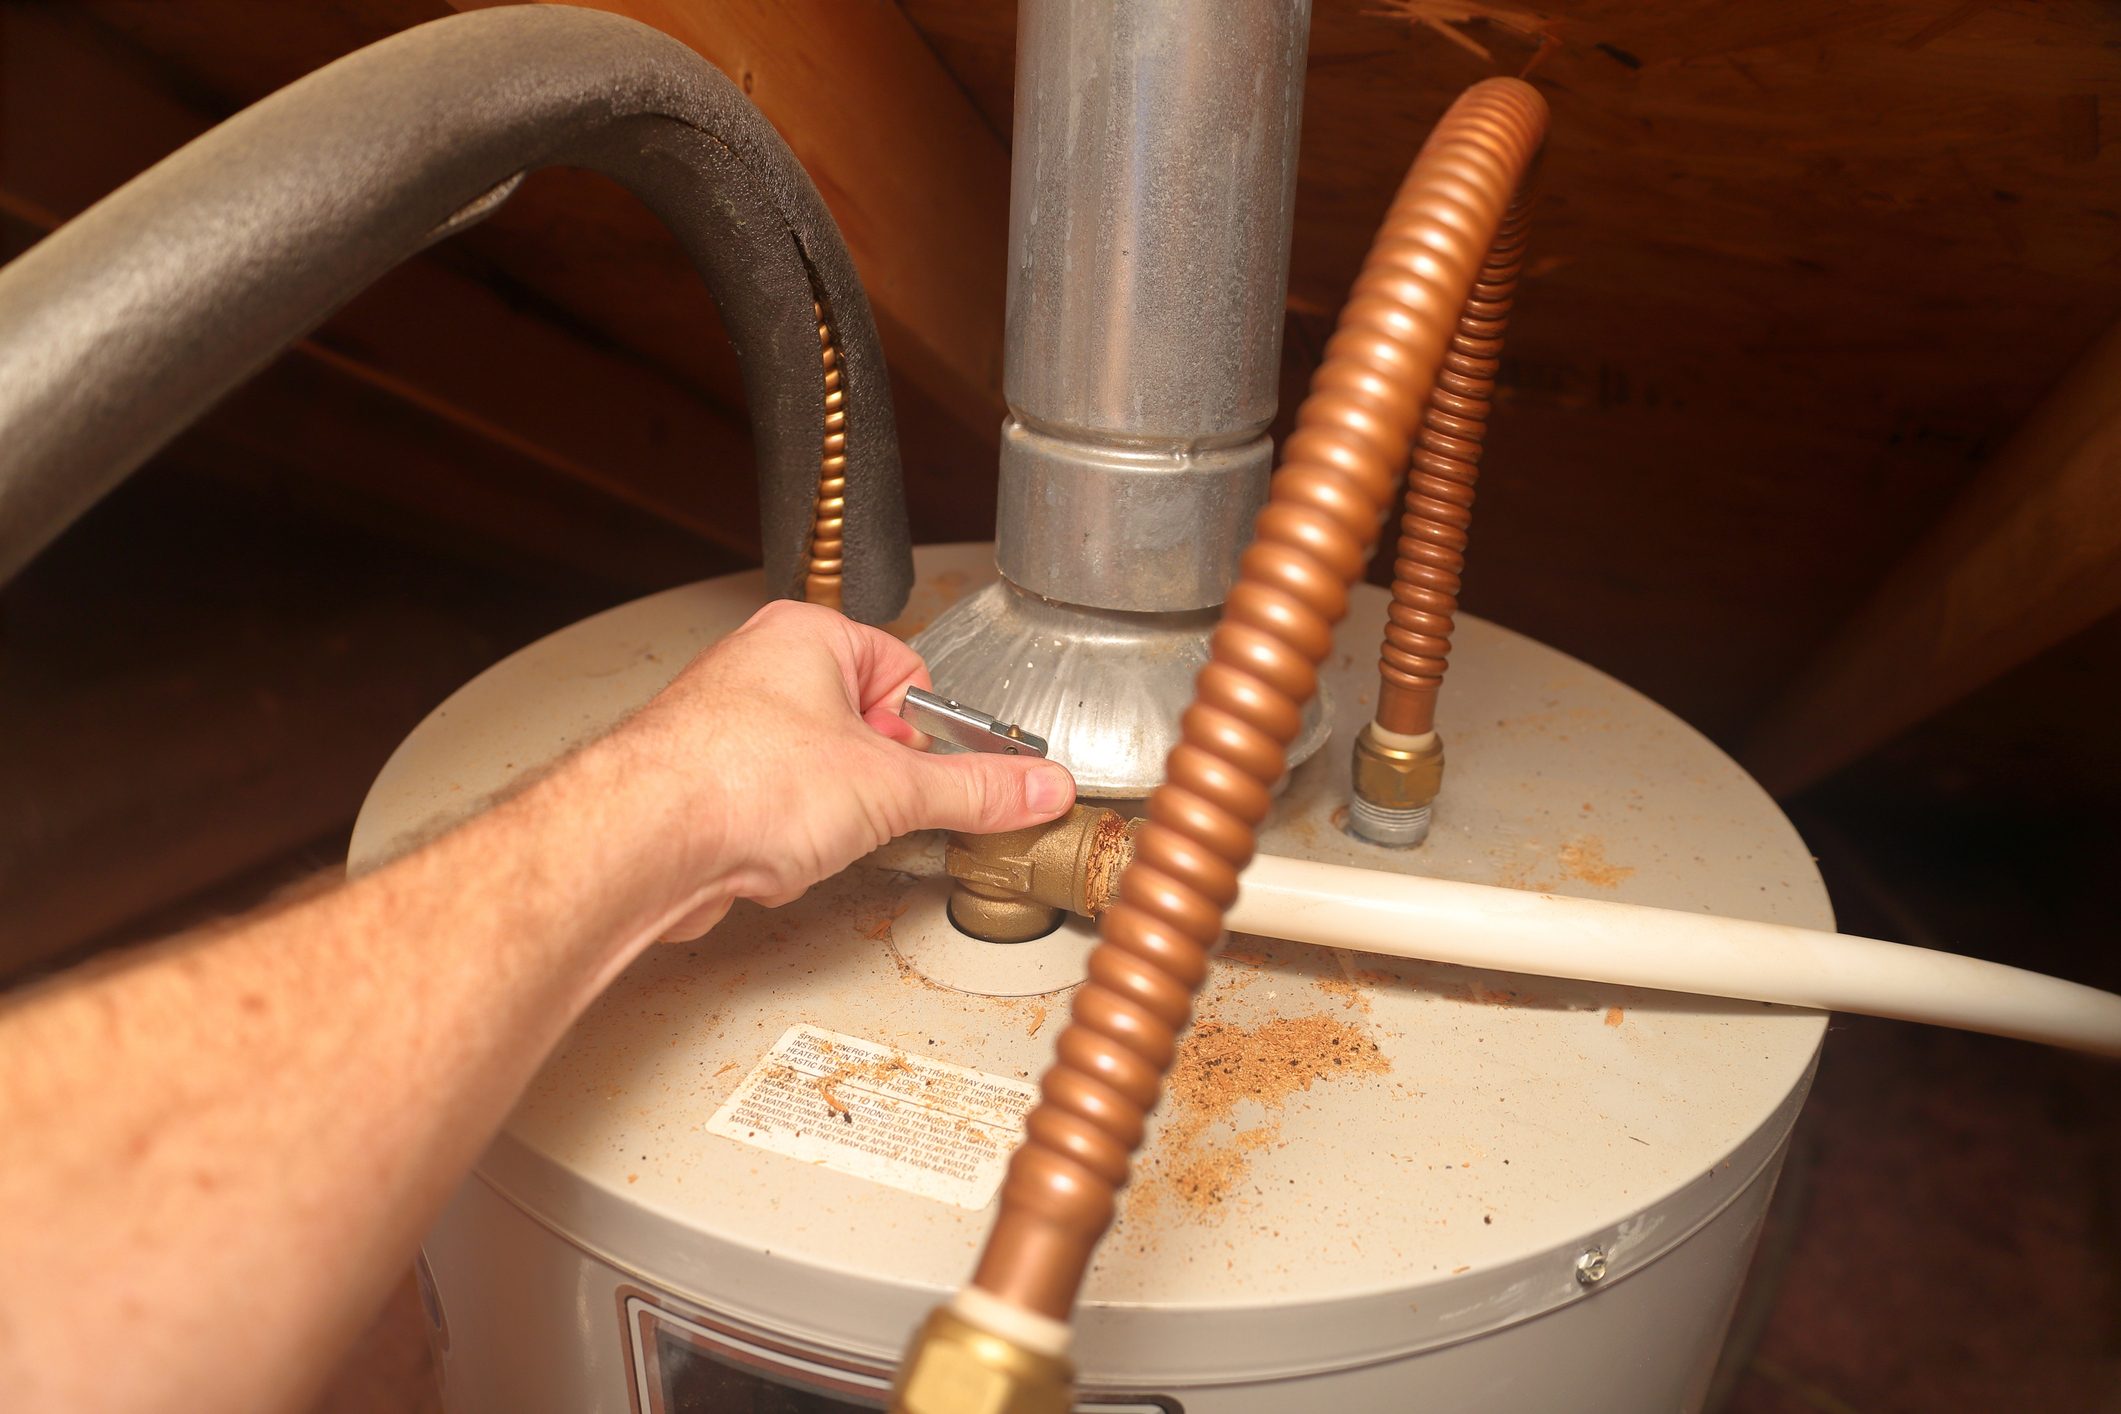 temperature and pressure release valve on hot water tank